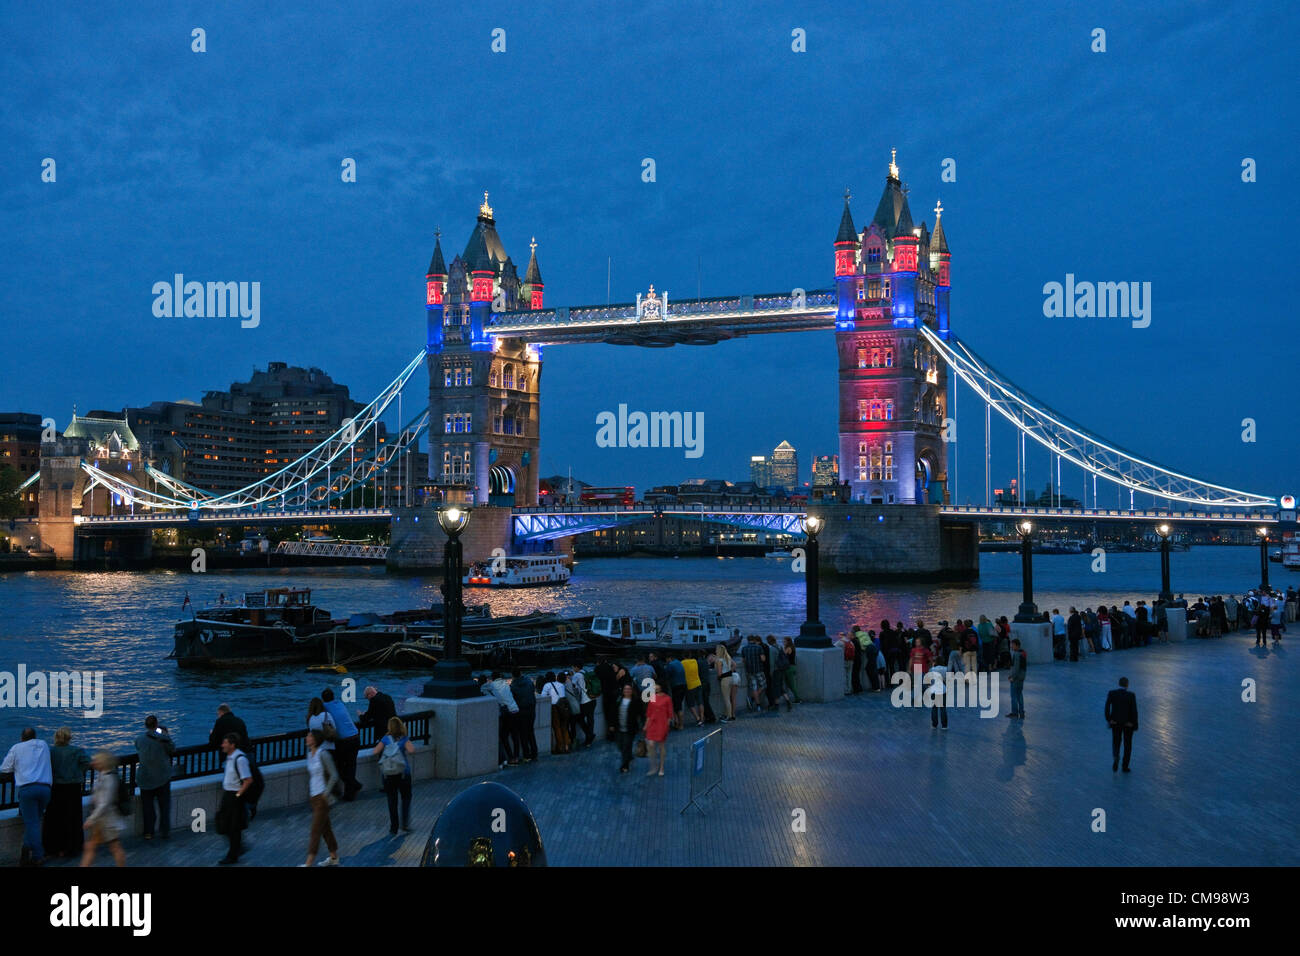 London, UK Wednesday27th June 2012. Following the unveiling of the Olympic Rings on Tower Bridge earlier in the day, crowds were treated to a spectacular preview of the light show that will play nightly during the Olympic Games. London is hosting the 30th Summer Olympic Games which begin on July 27th 2012. Stock Photo